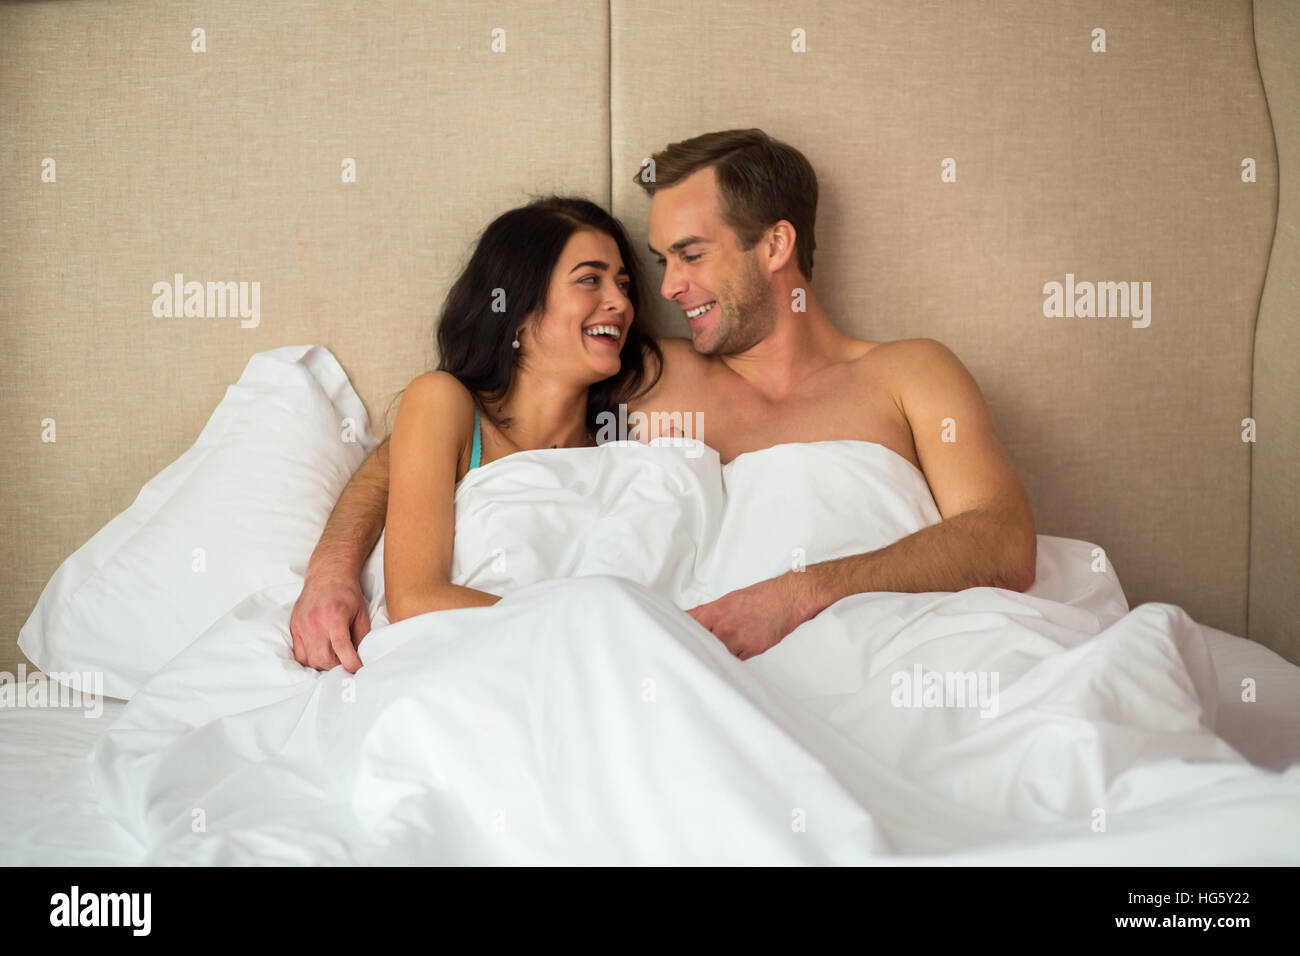 Laughing couple in bed. Stock Photo